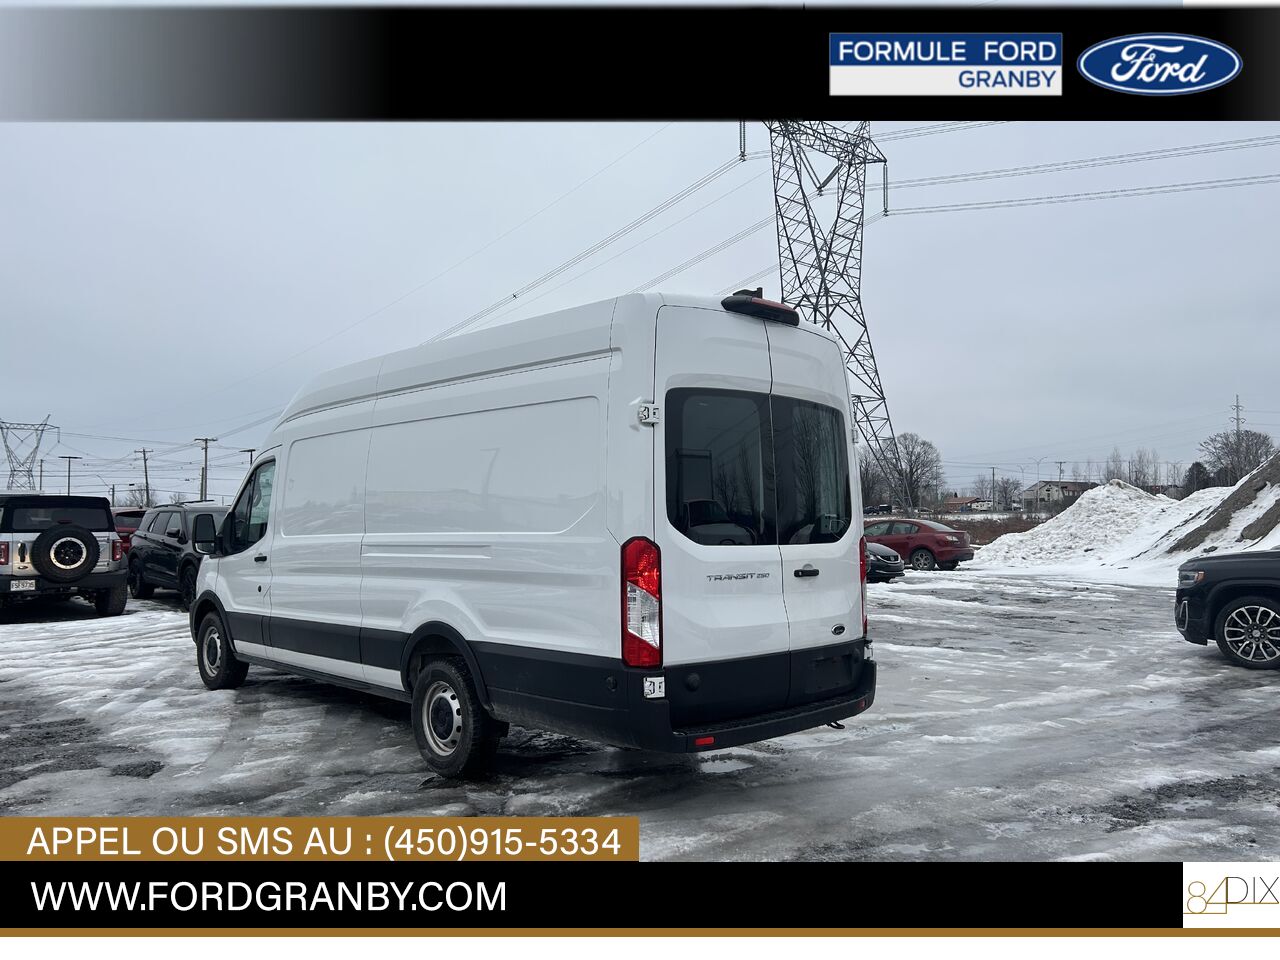 2020 Ford Transit fourgon utilitaire Granby - photo #4